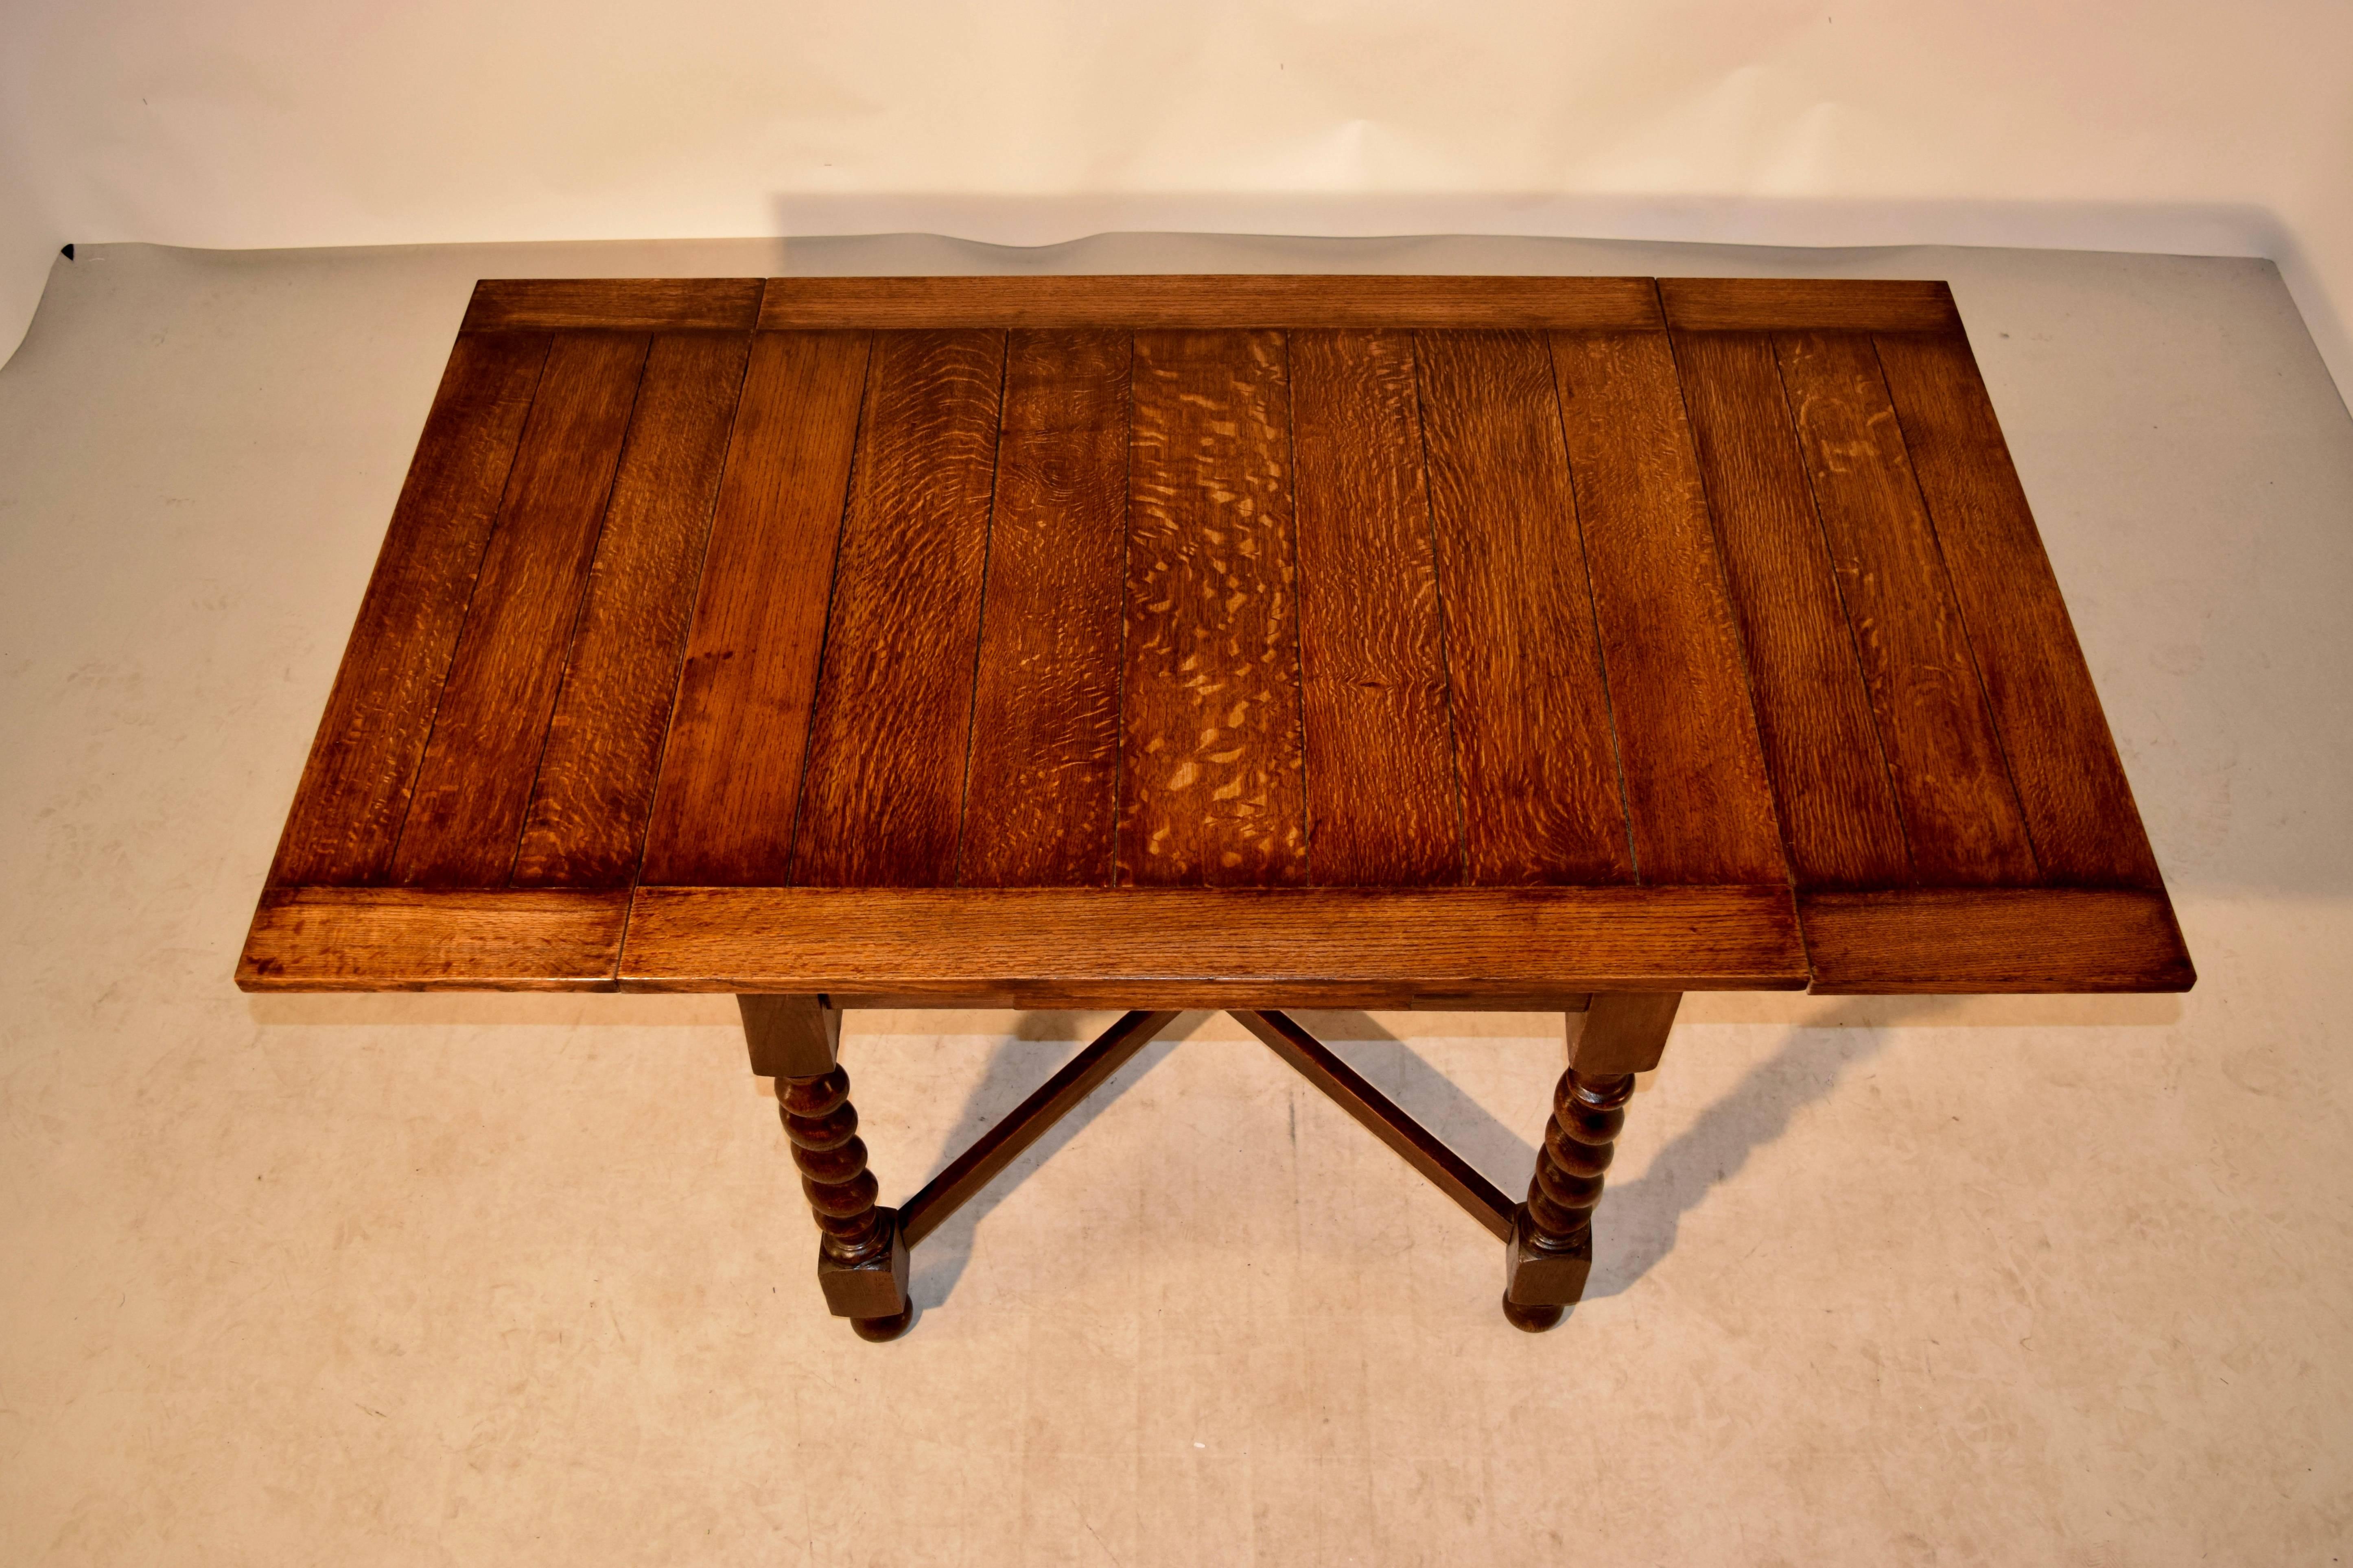 Early 20th Century English Oak Table with Draw-Leaves, circa 1900